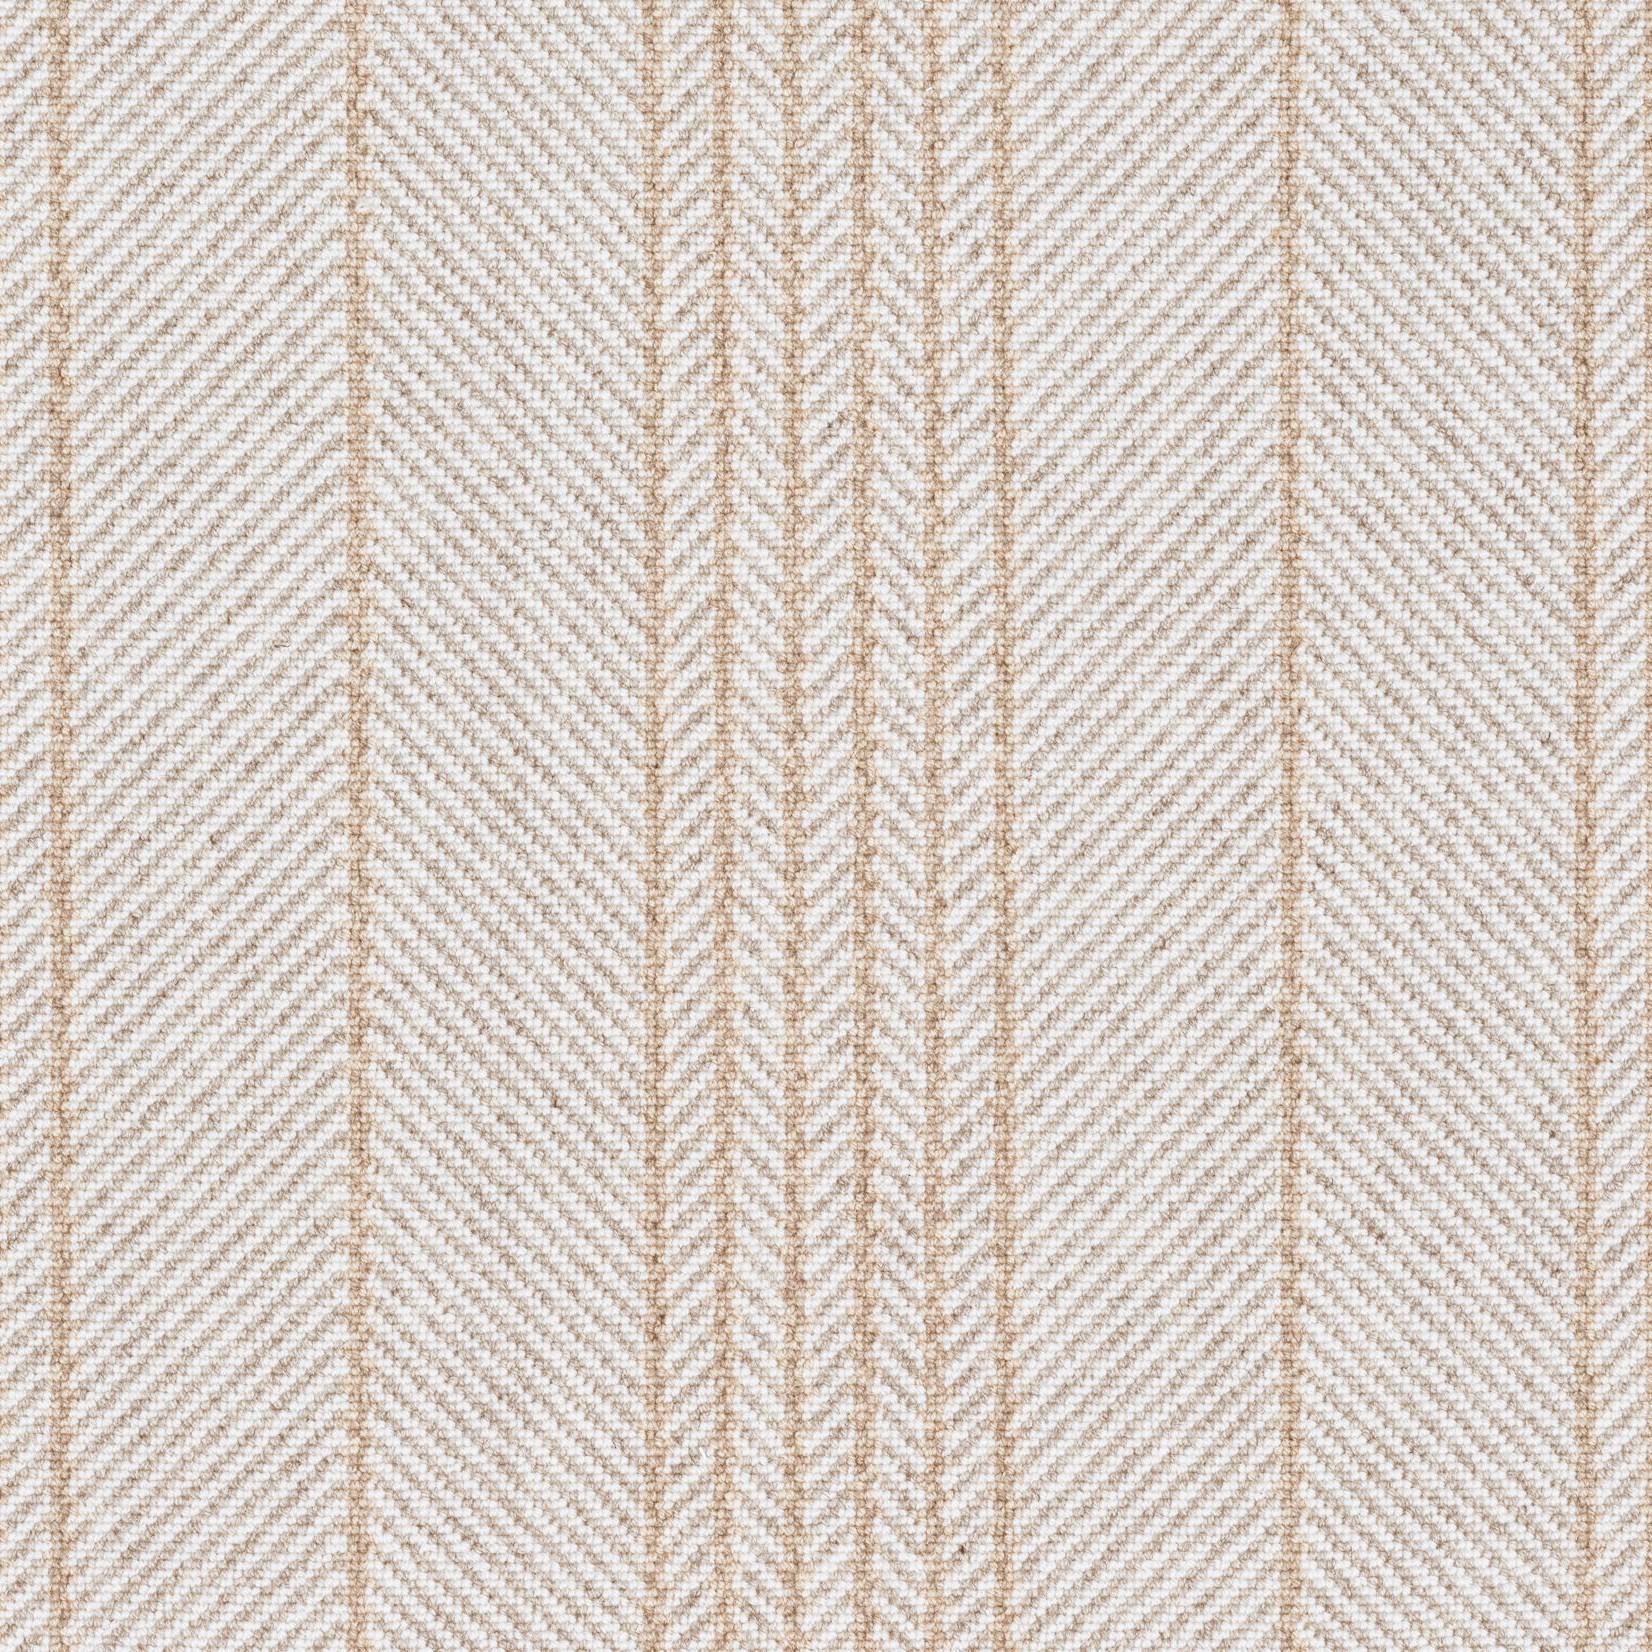 Product Image for RICHIE SANDY BEIGE DUNE